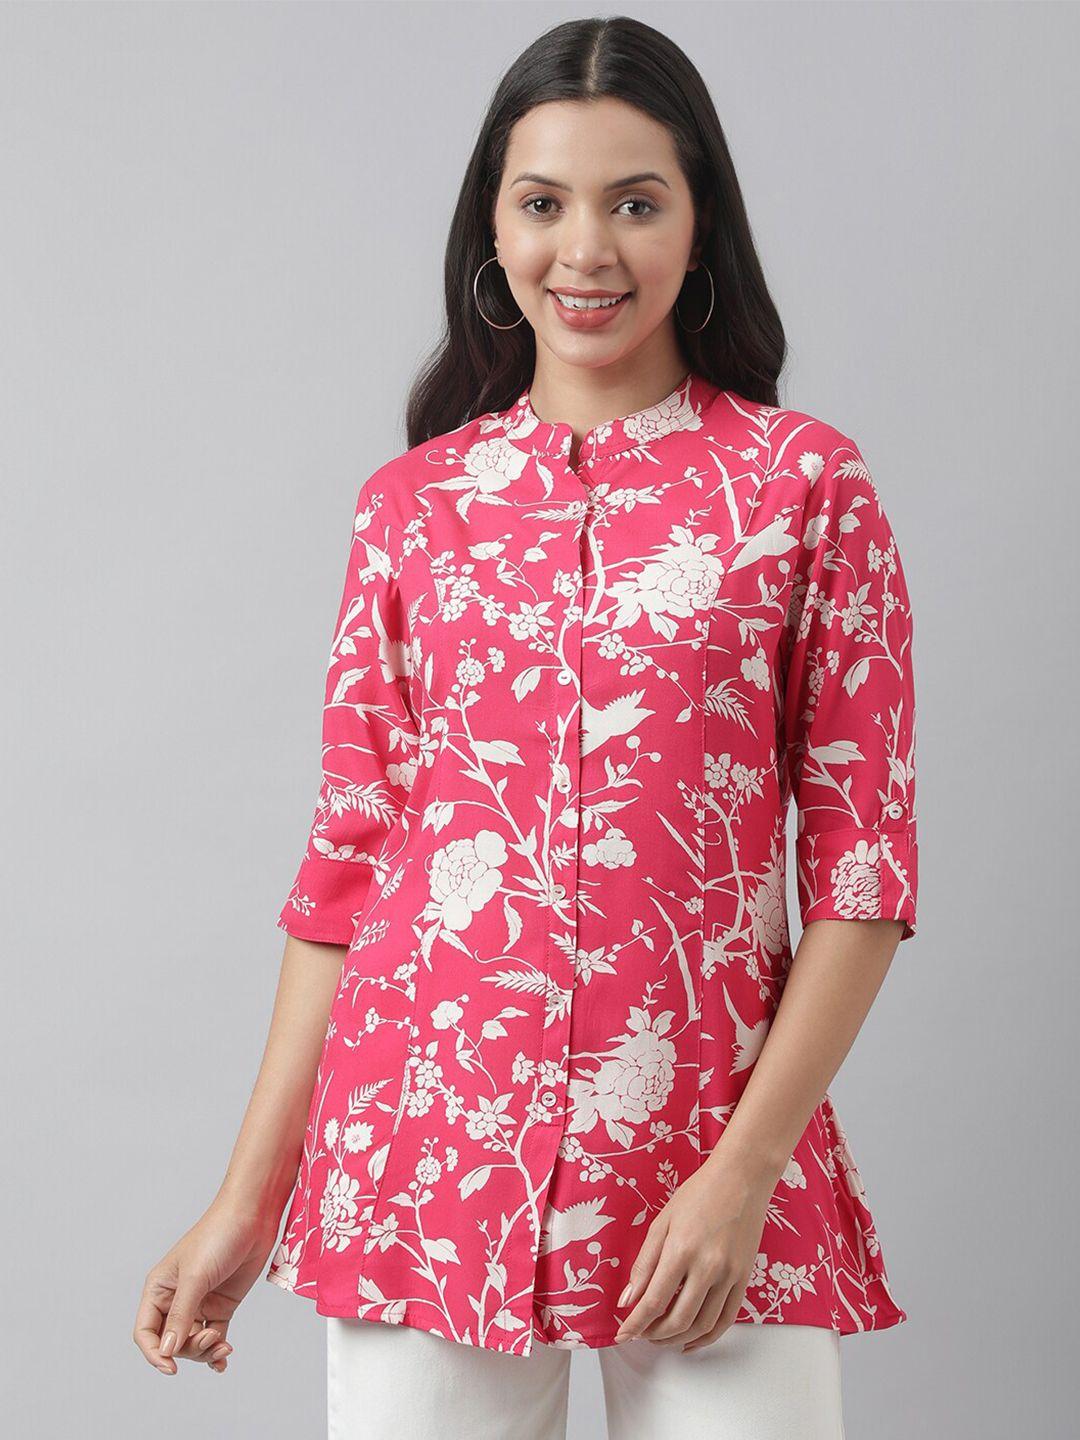 divena floral print mandarin collar roll-up sleeves a-line shirt style top